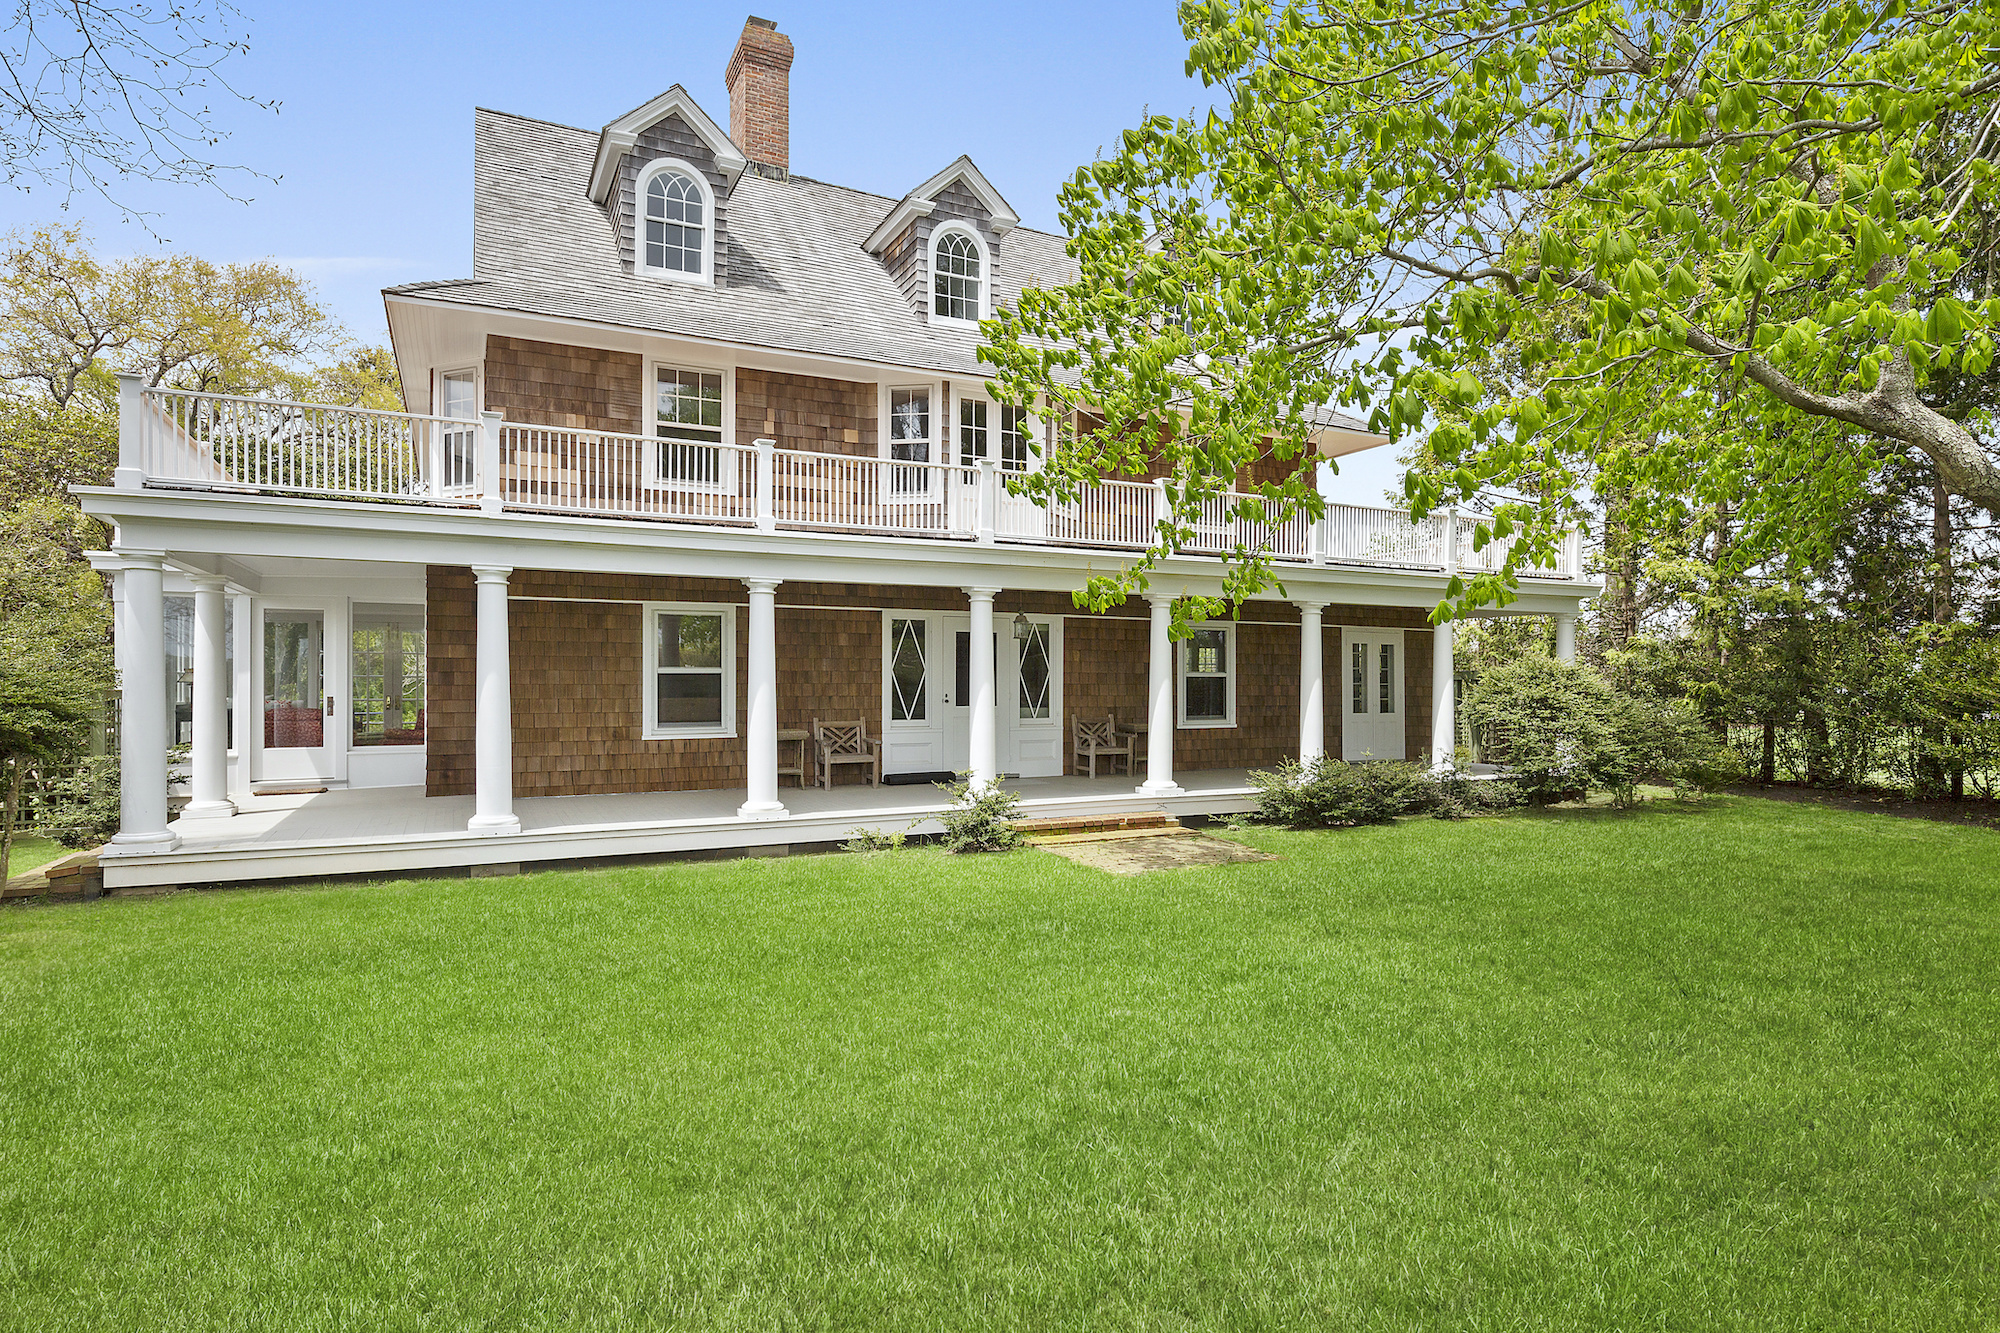 Jackie Kennedy’s childhood summer home in the Hamptons hits the market for $7.5M